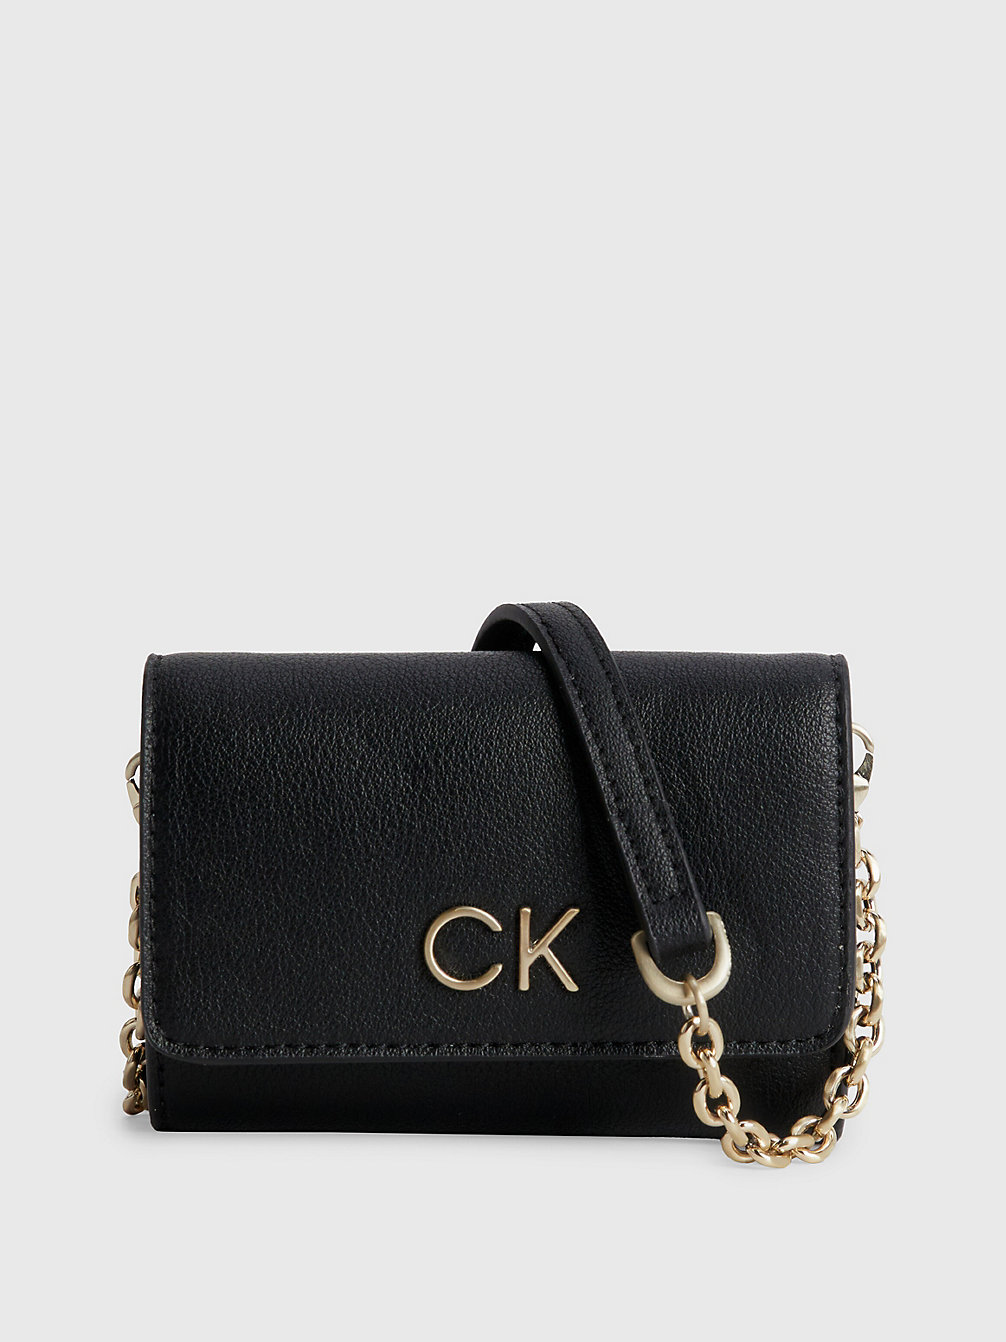 CK BLACK Recycled Trifold Wallet Bag undefined women Calvin Klein